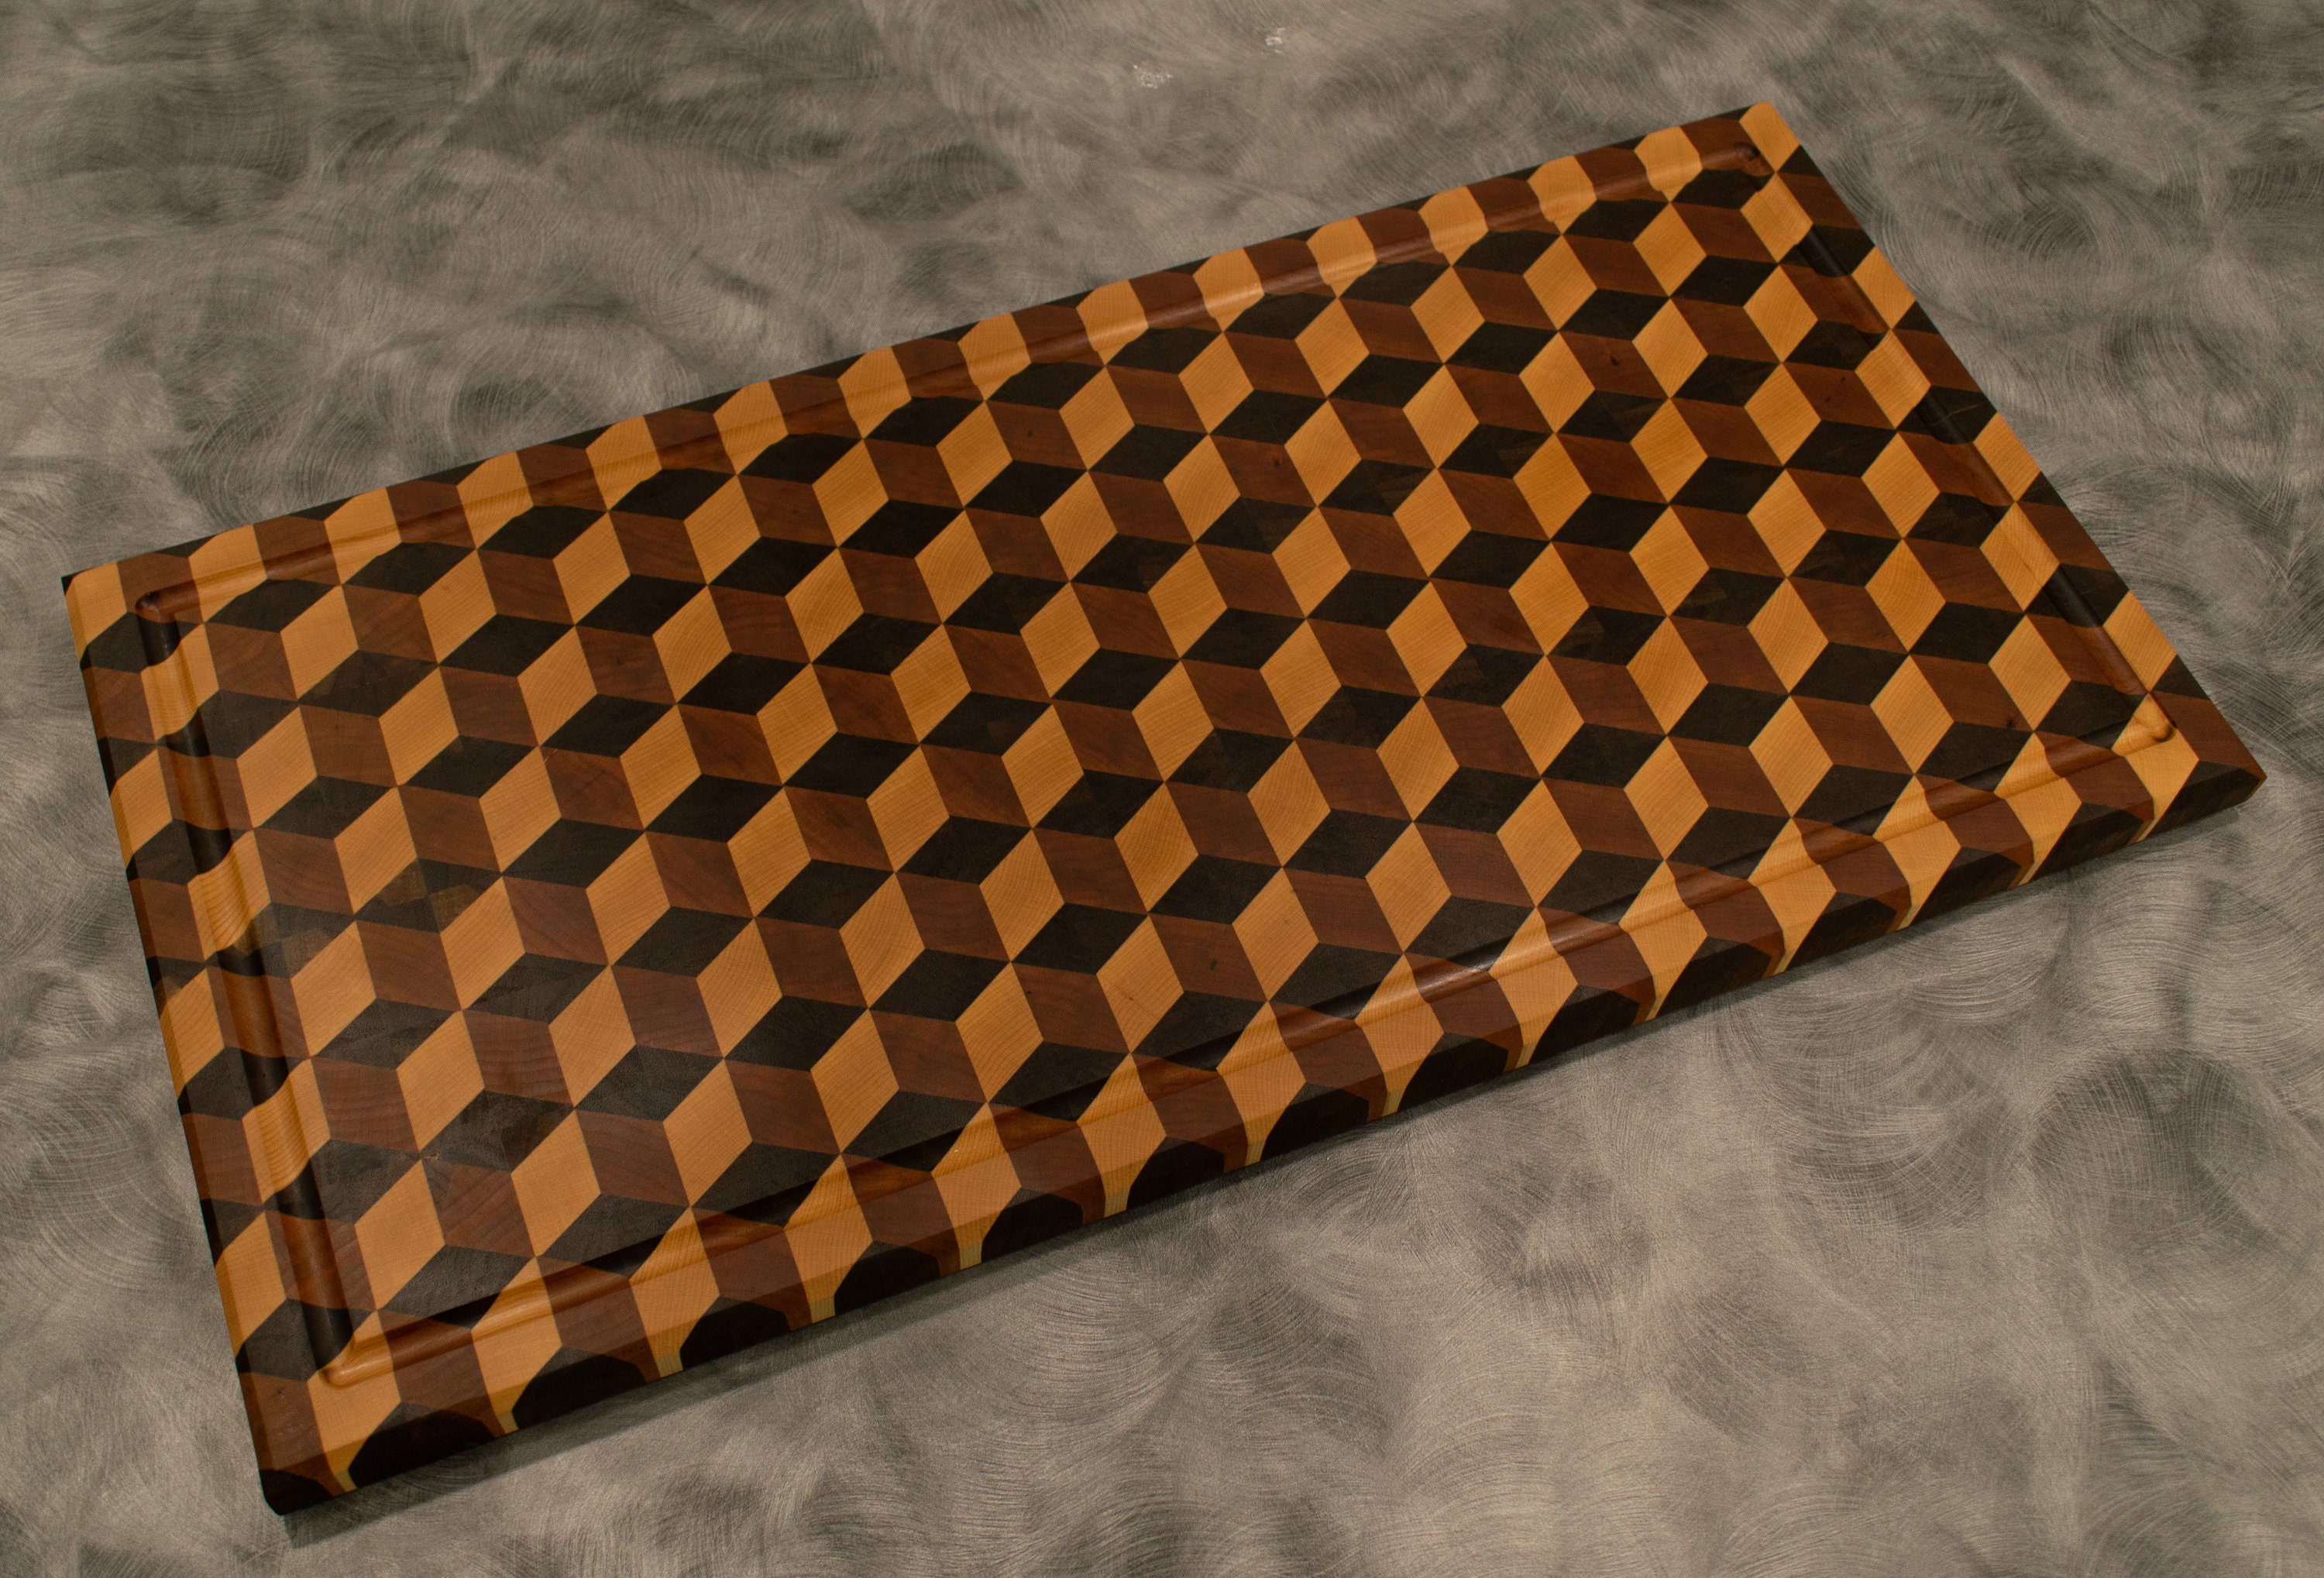 Handmade 3D Checkered Cutting Board with Feet - End Grain Cutting Board Block for Prep & Presentation - Large Charcuterie Board Serving Platter